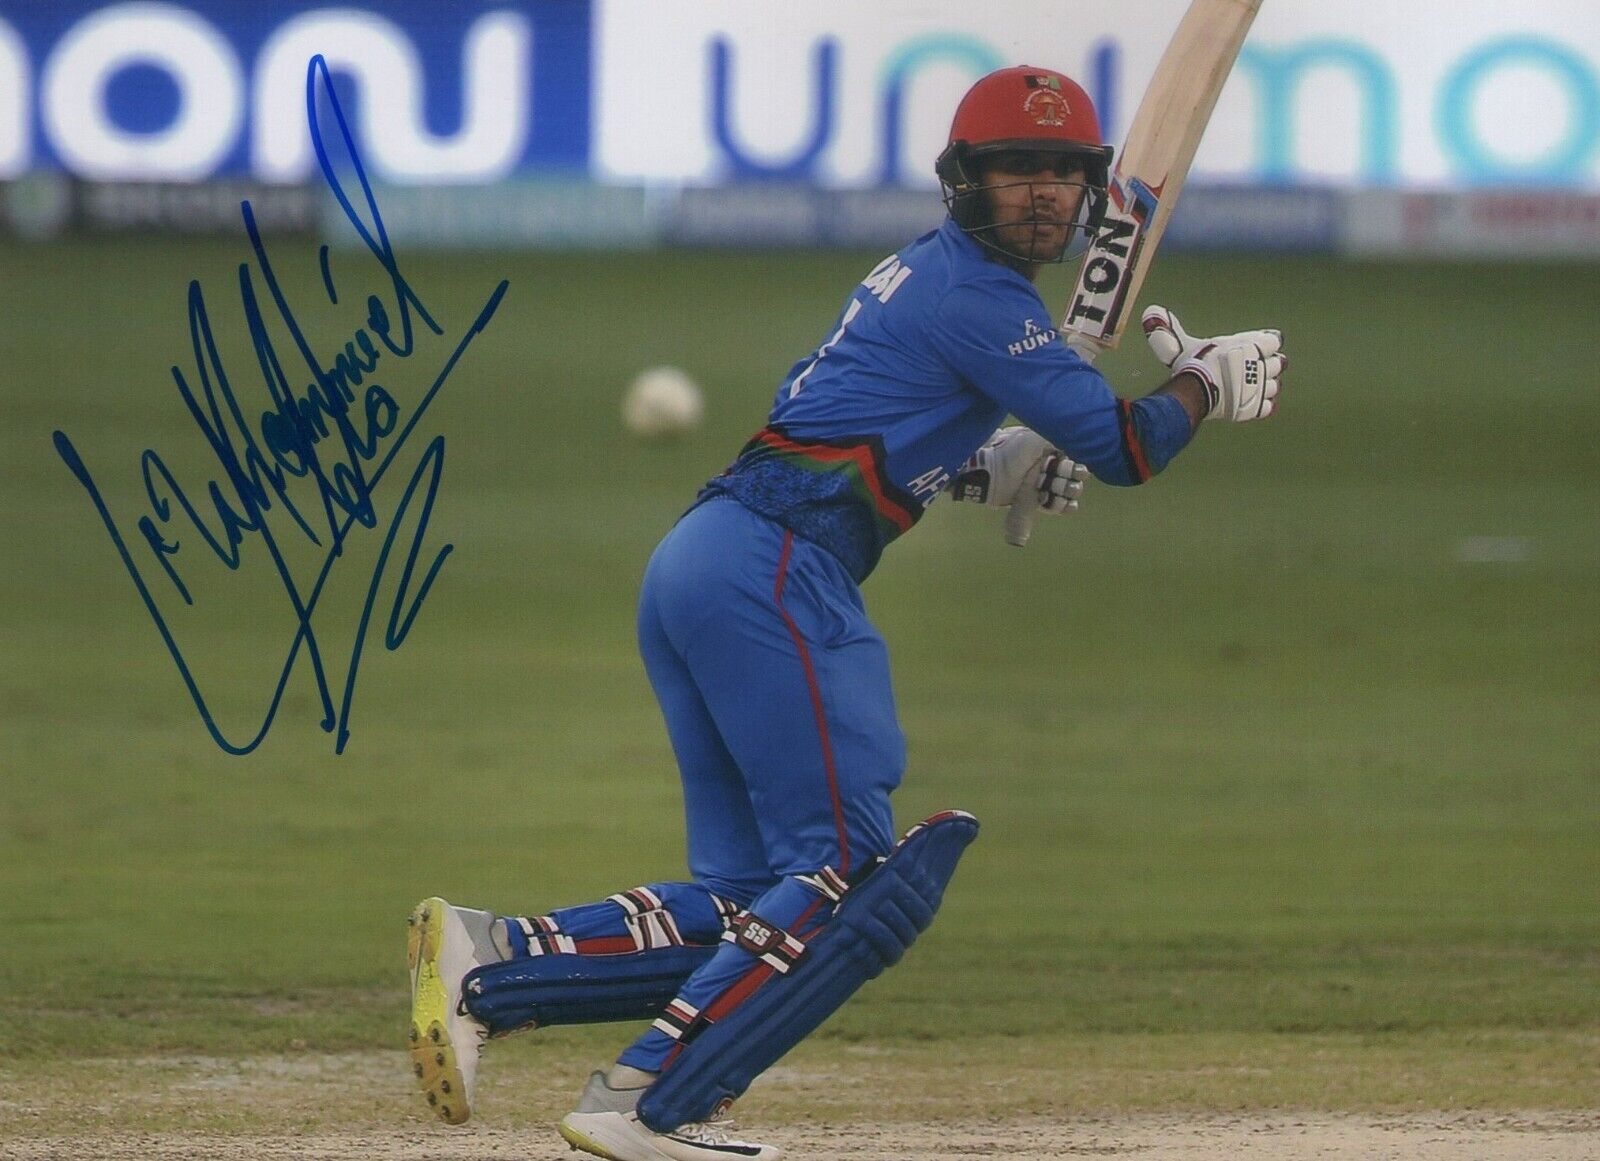 Original Autographed Photo of Afghan Cricketer Mohammad Nabi